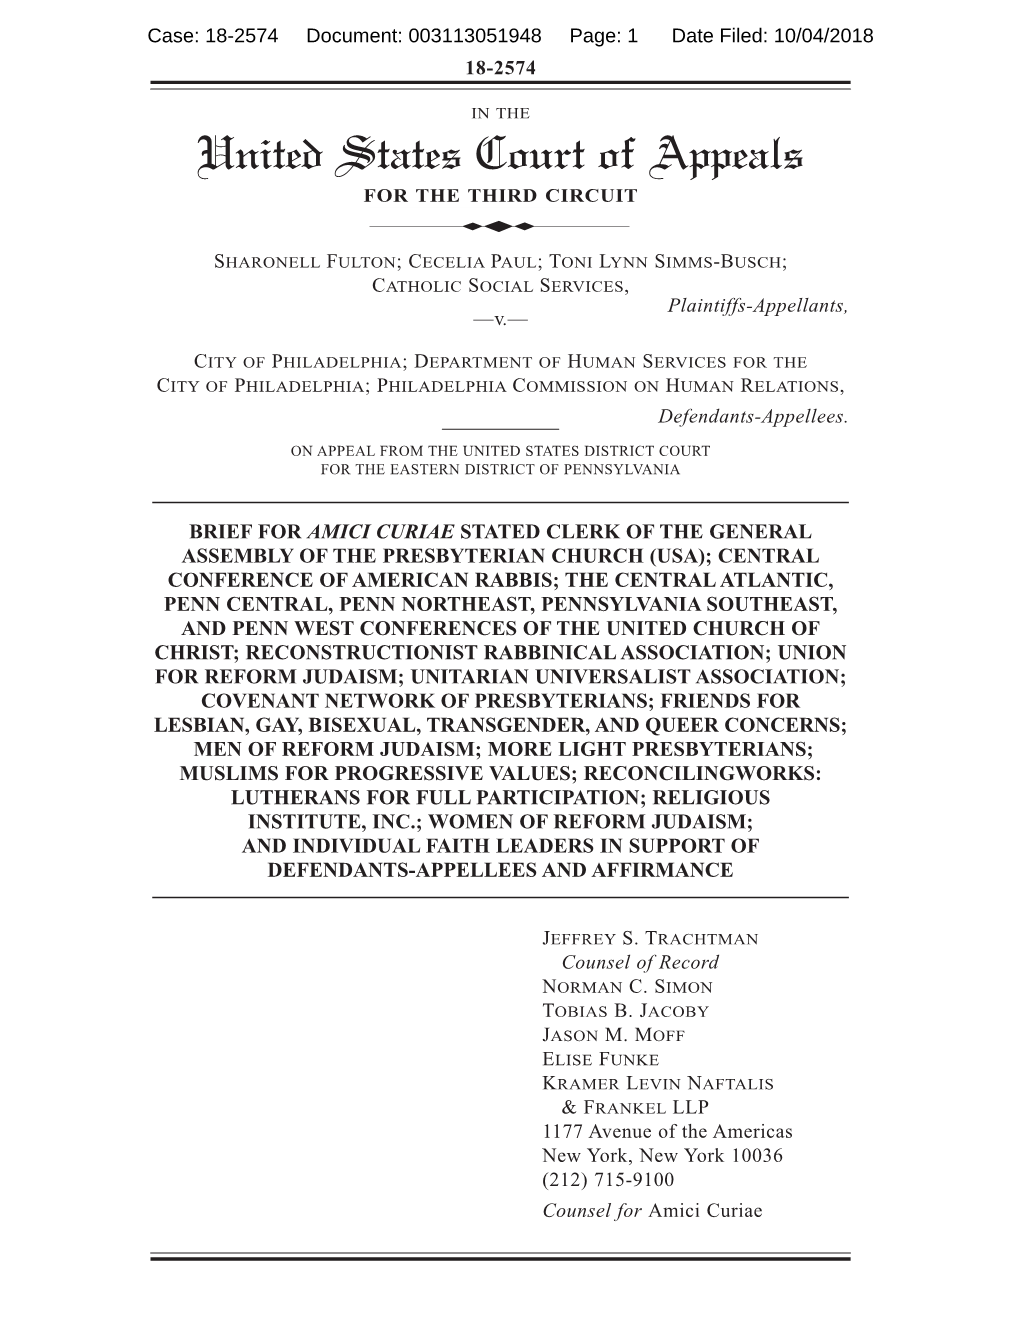 United States Court of Appeals for the THIRD CIRCUIT